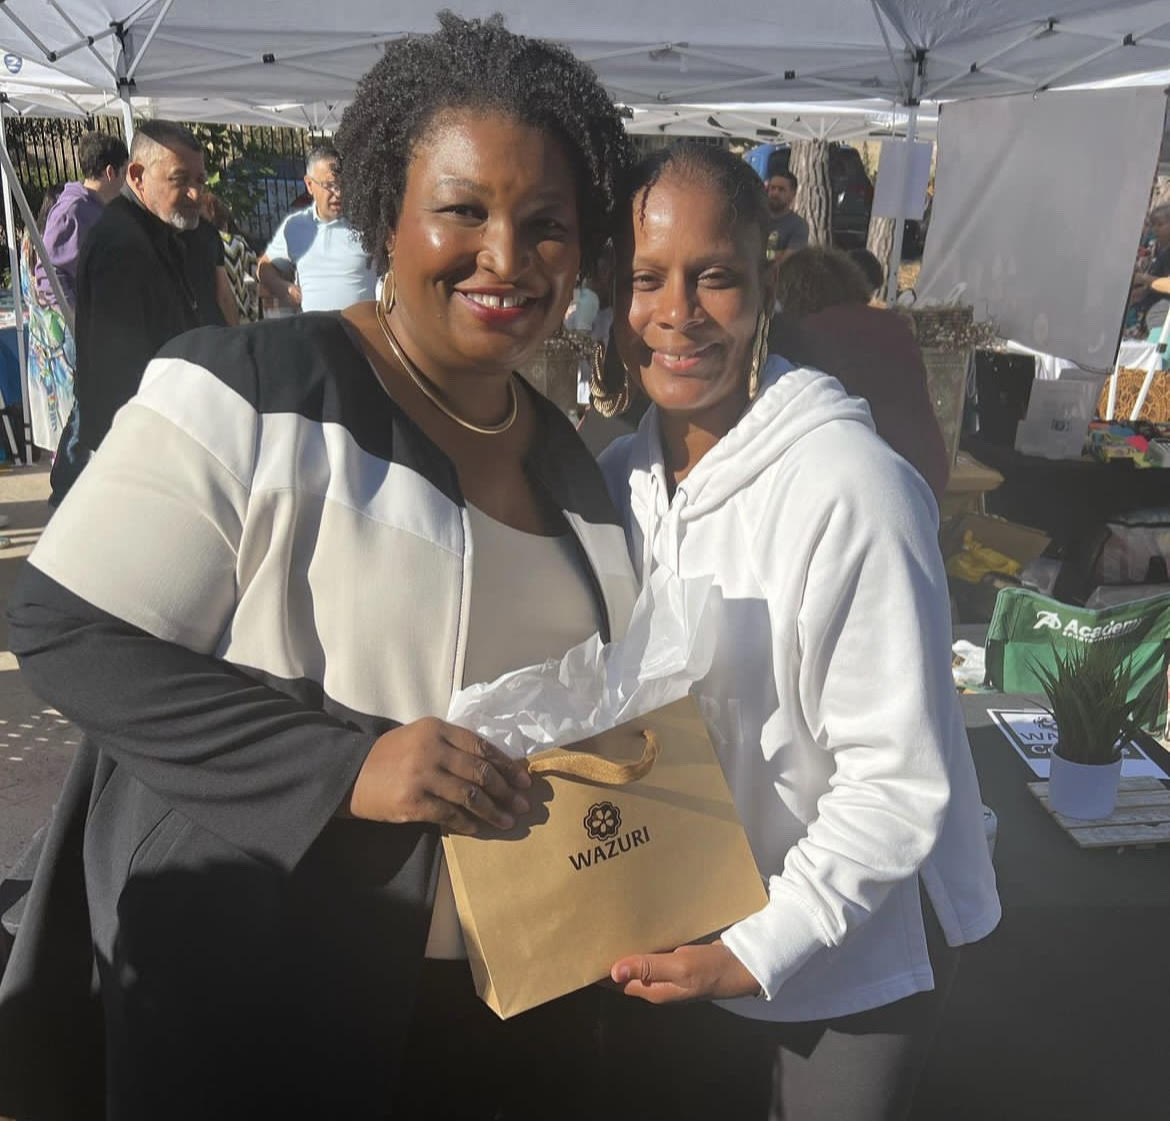 Wazuri+Cosmetics+owner+Charlene+Wilhelmsen+poses+with+politician+Stacey+Abrams+at+the+Atlanta+Arab+Festival.